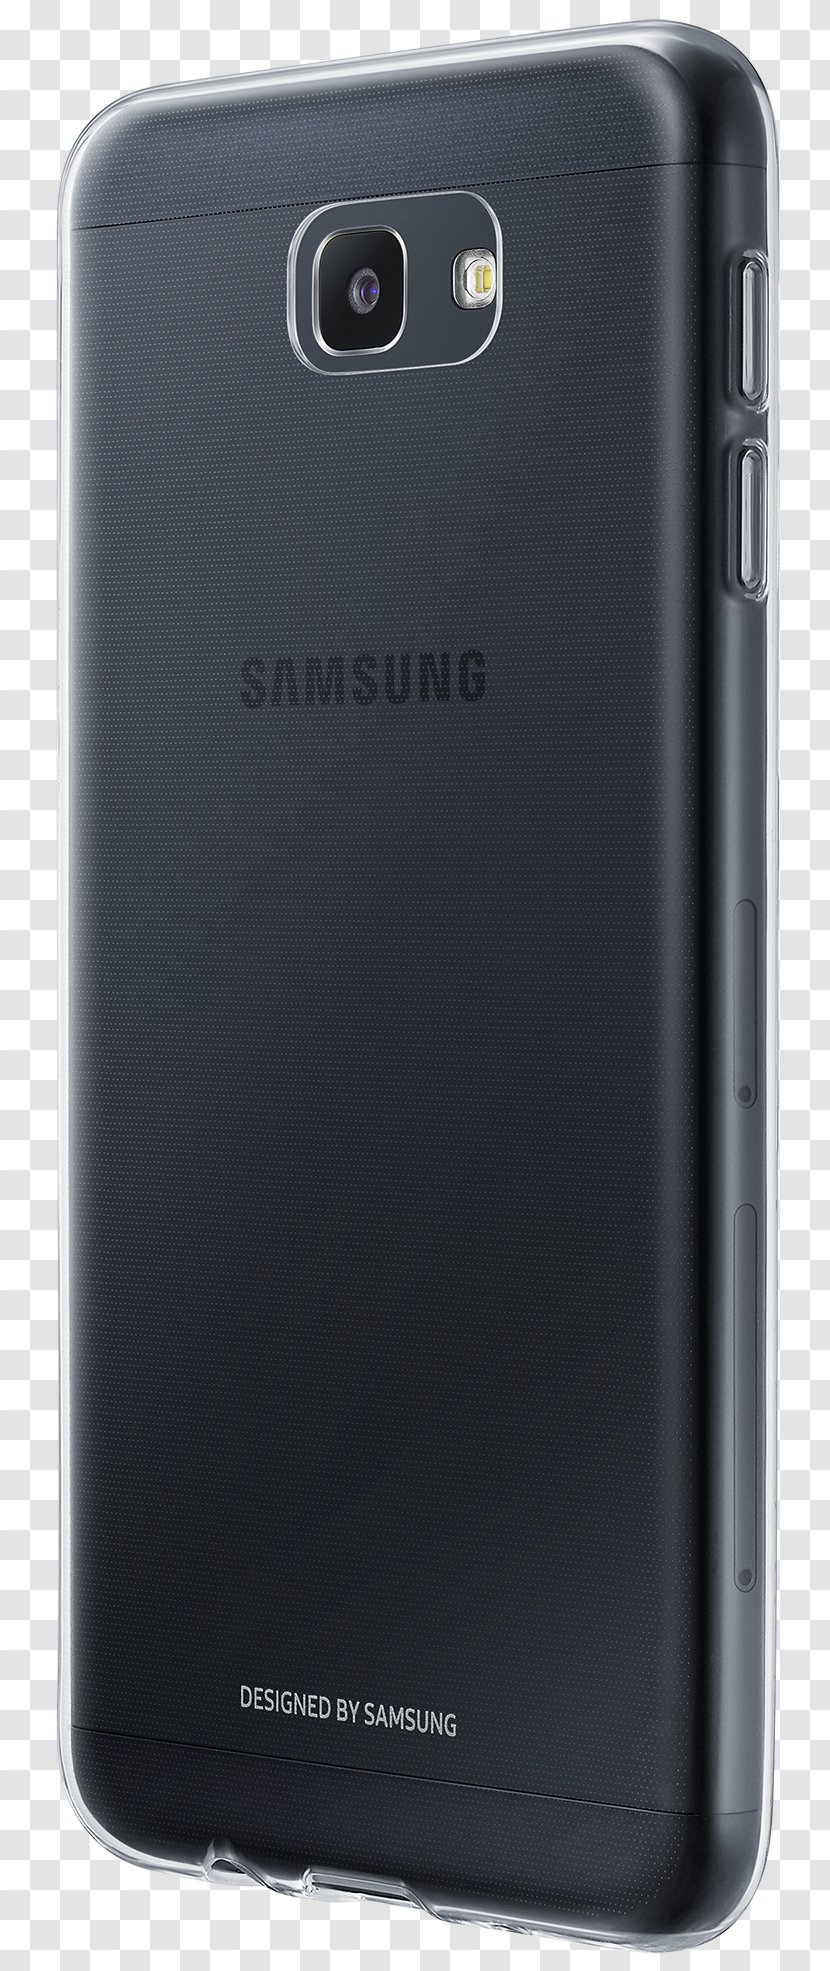 Smartphone Feature Phone Samsung Galaxy A7 (2016) J5 Prime - Technology Transparent PNG